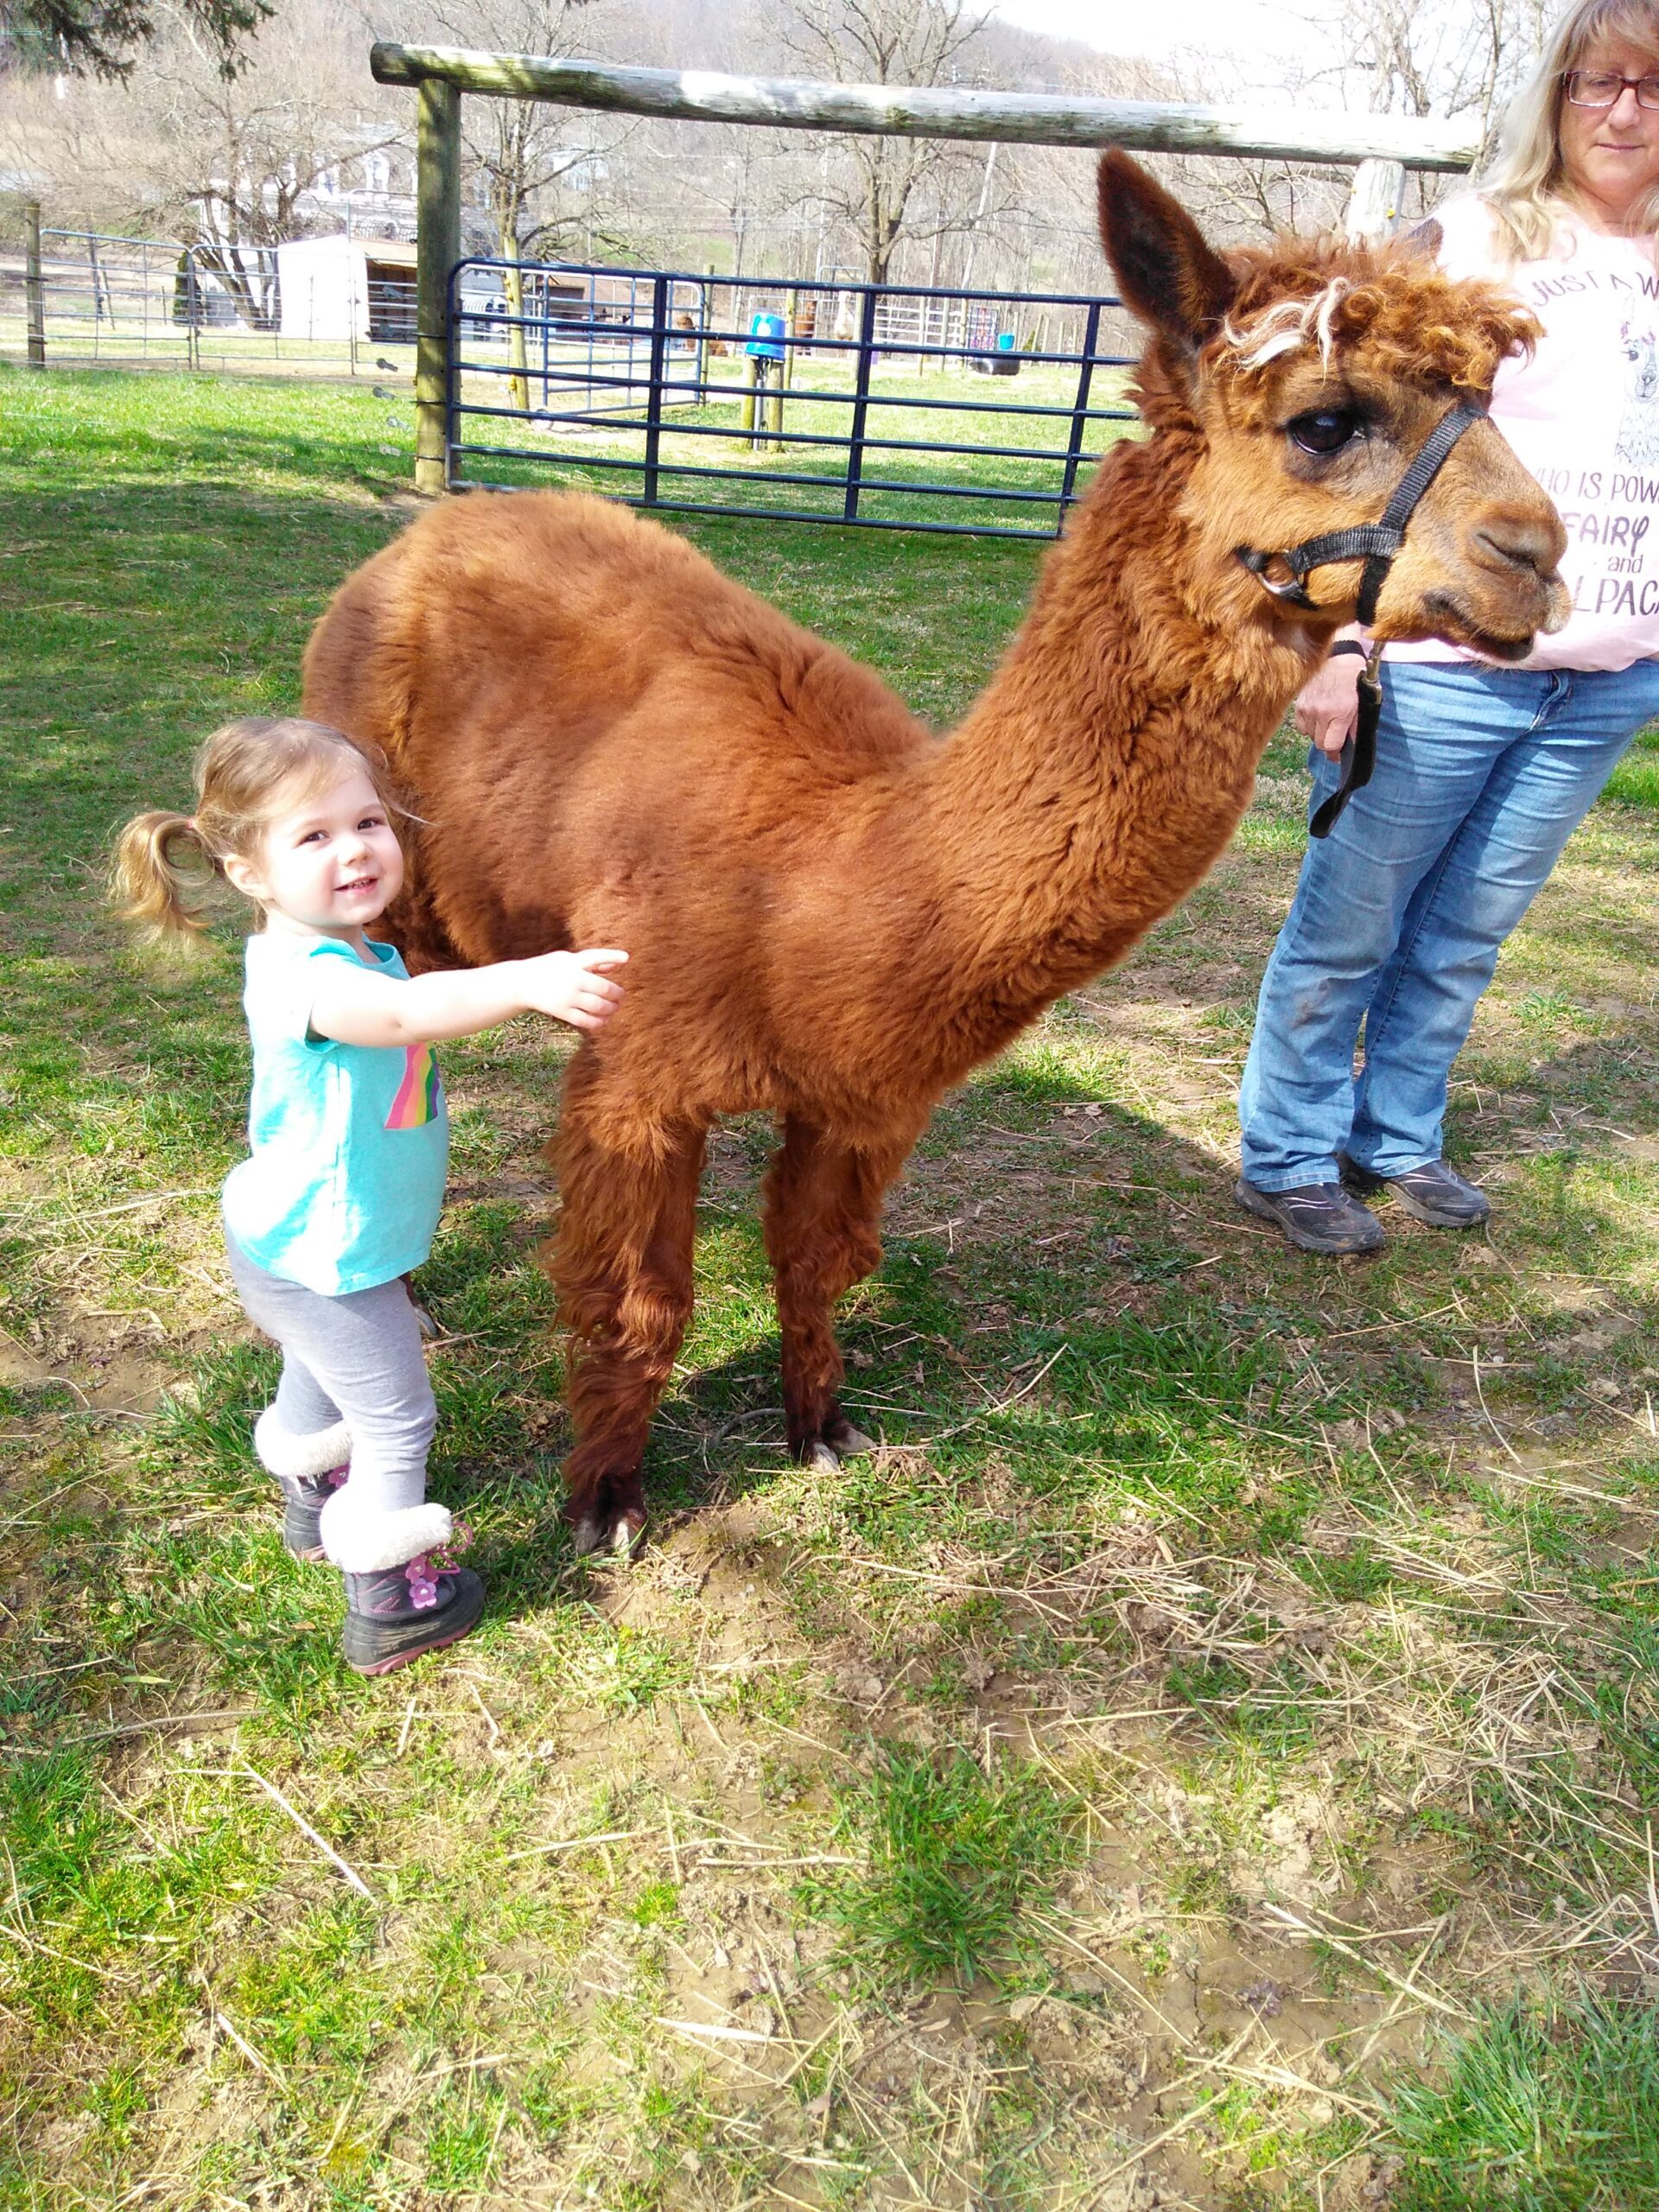 a little kid pointing at an alpaca and smiling during a visit to the alpaca farm